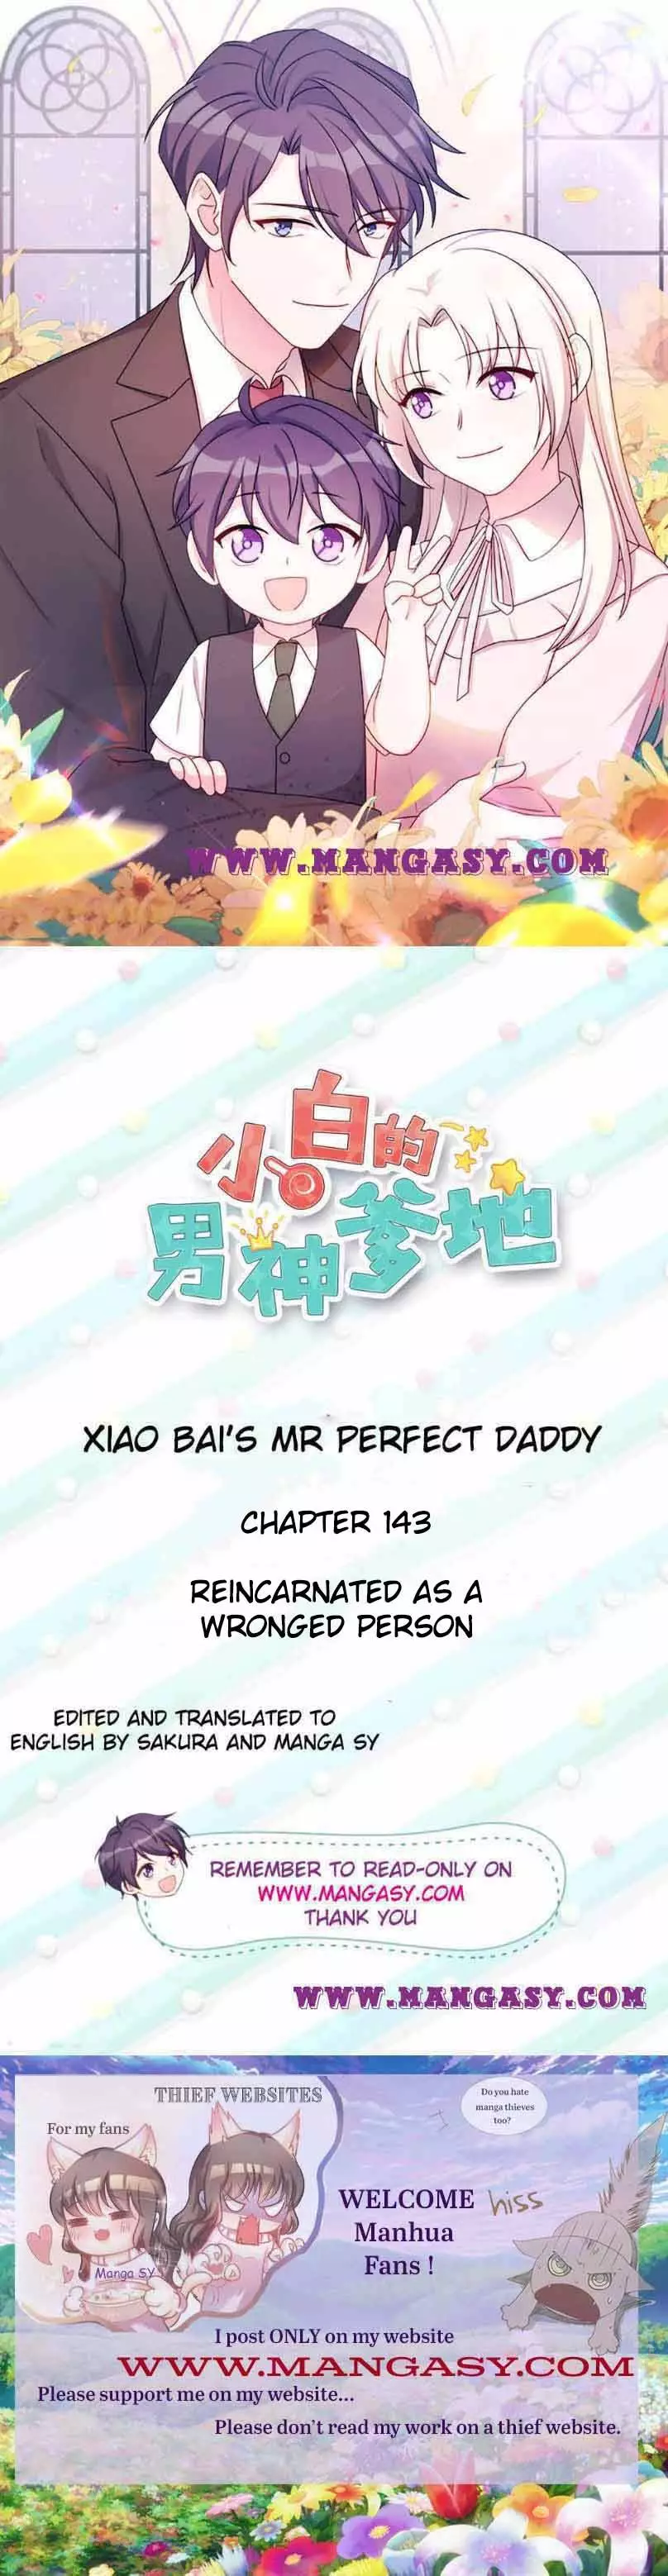 Xiao Bai’S Father Is A Wonderful Person - 143 page 1-2cb23c08